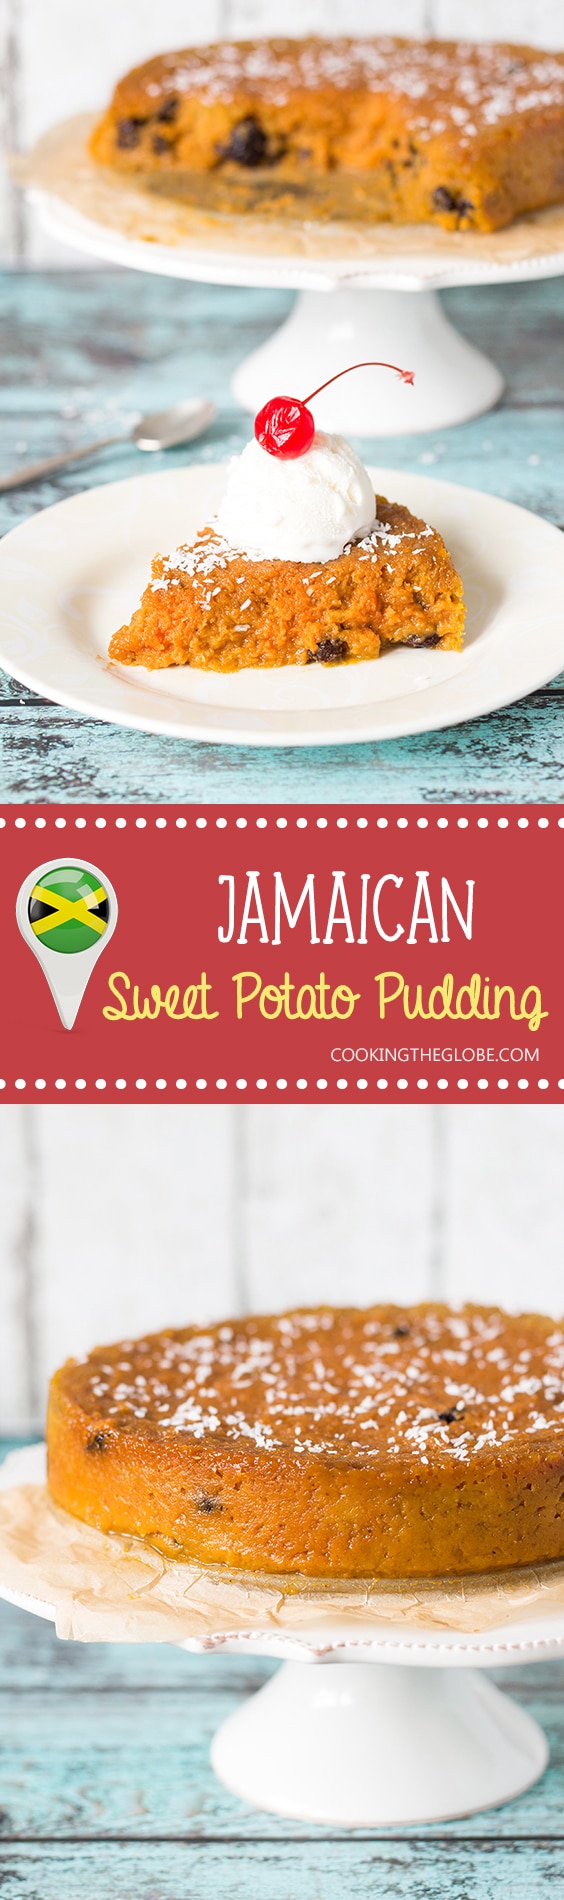 This Jamaican Sweet Potato Pudding or Pone is sweet, with a notes of cinnamon, nutmeg and vanilla! | cookingtheglobe.com